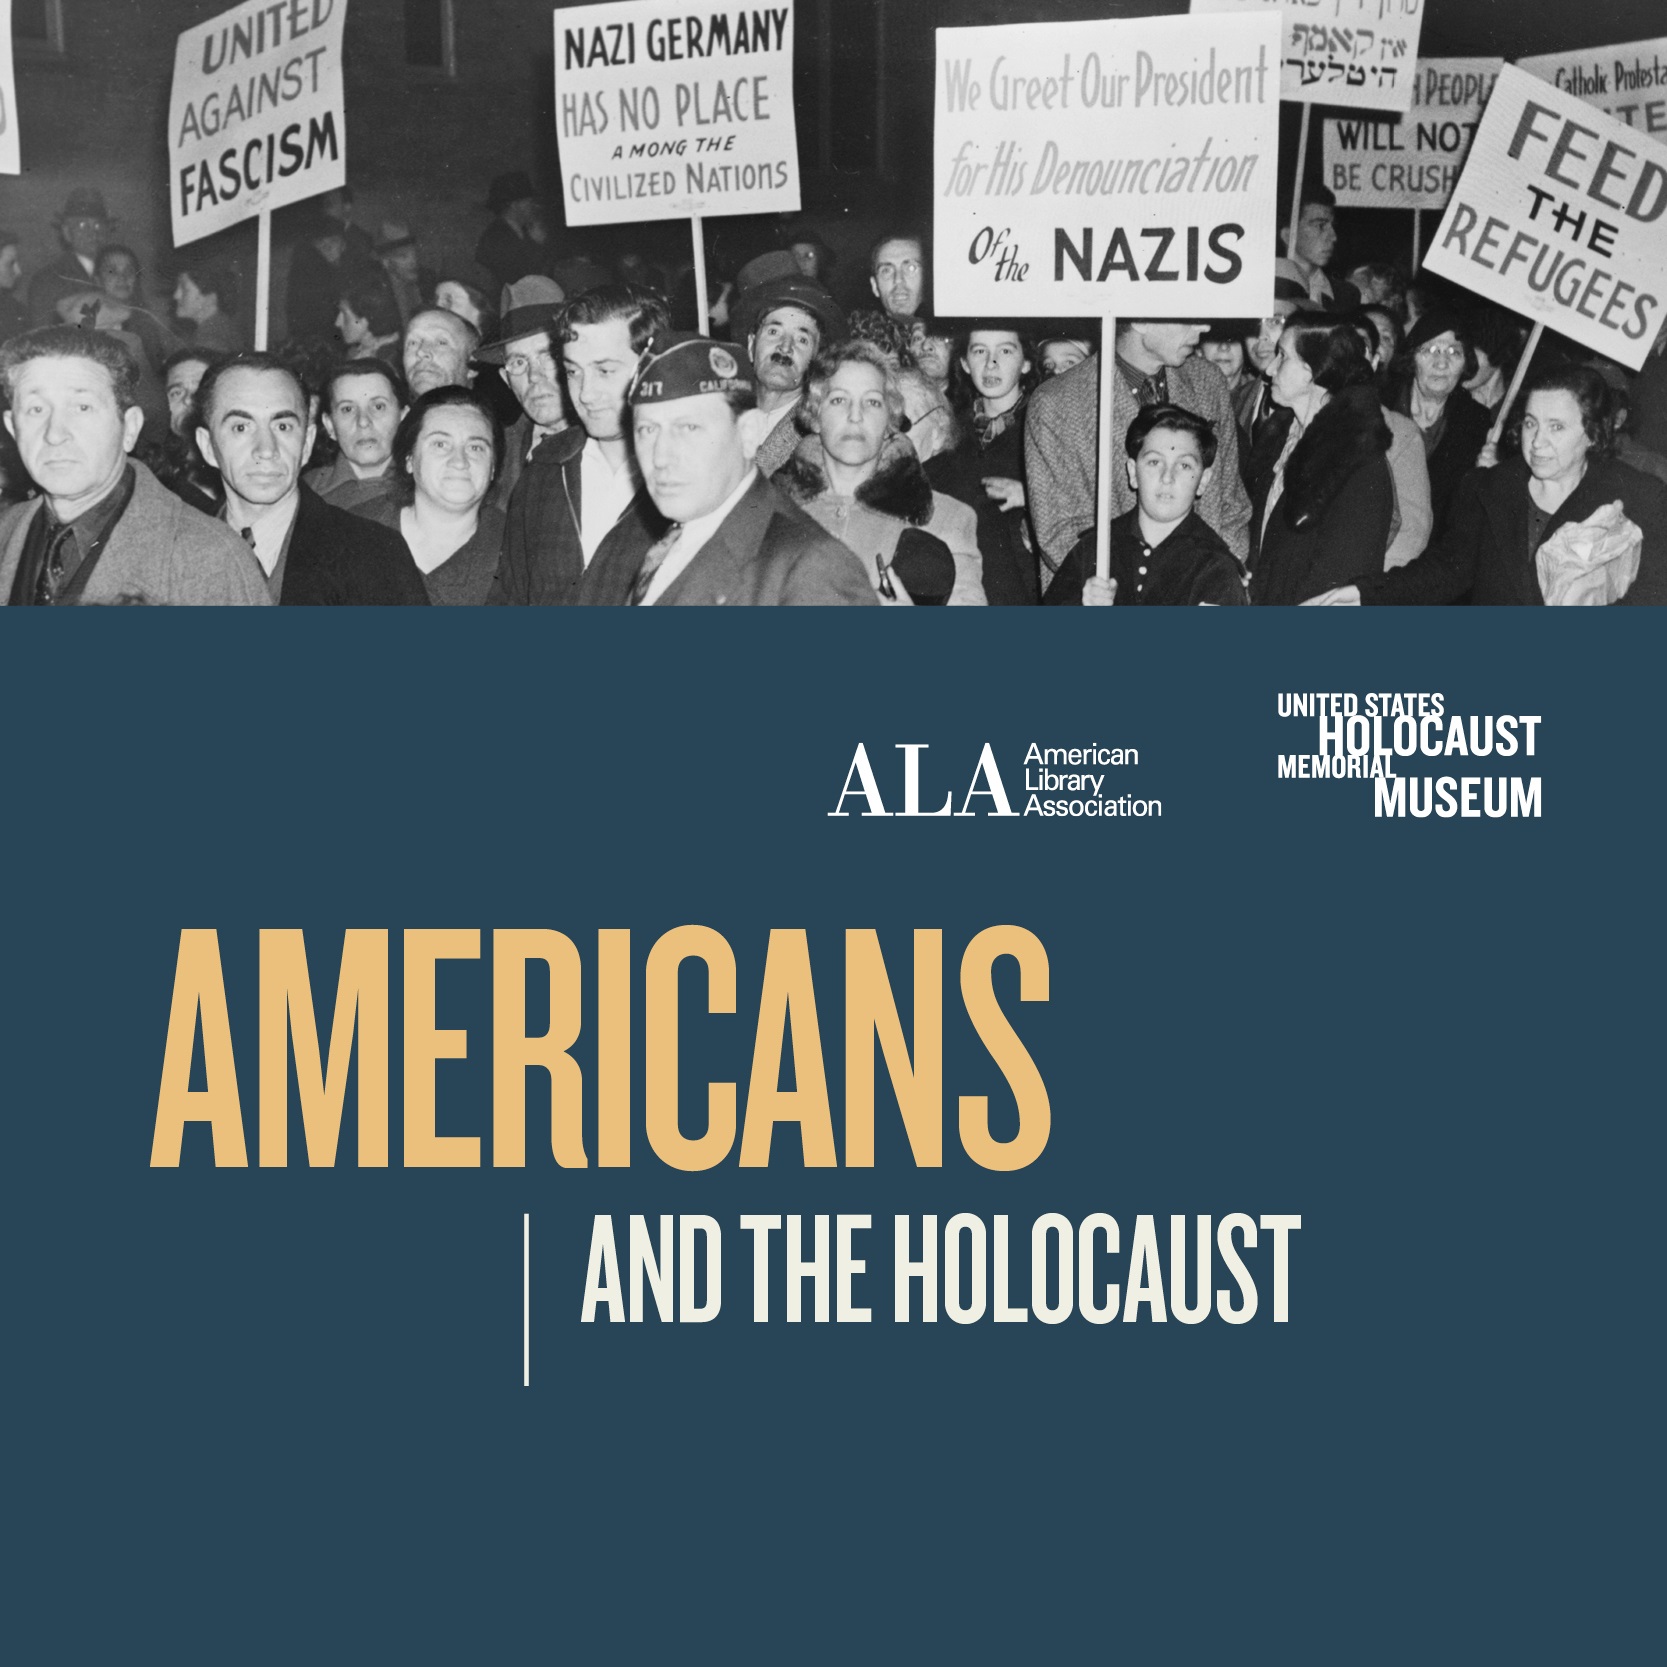 graphic advertising the Holocaust Traveling Exhibition